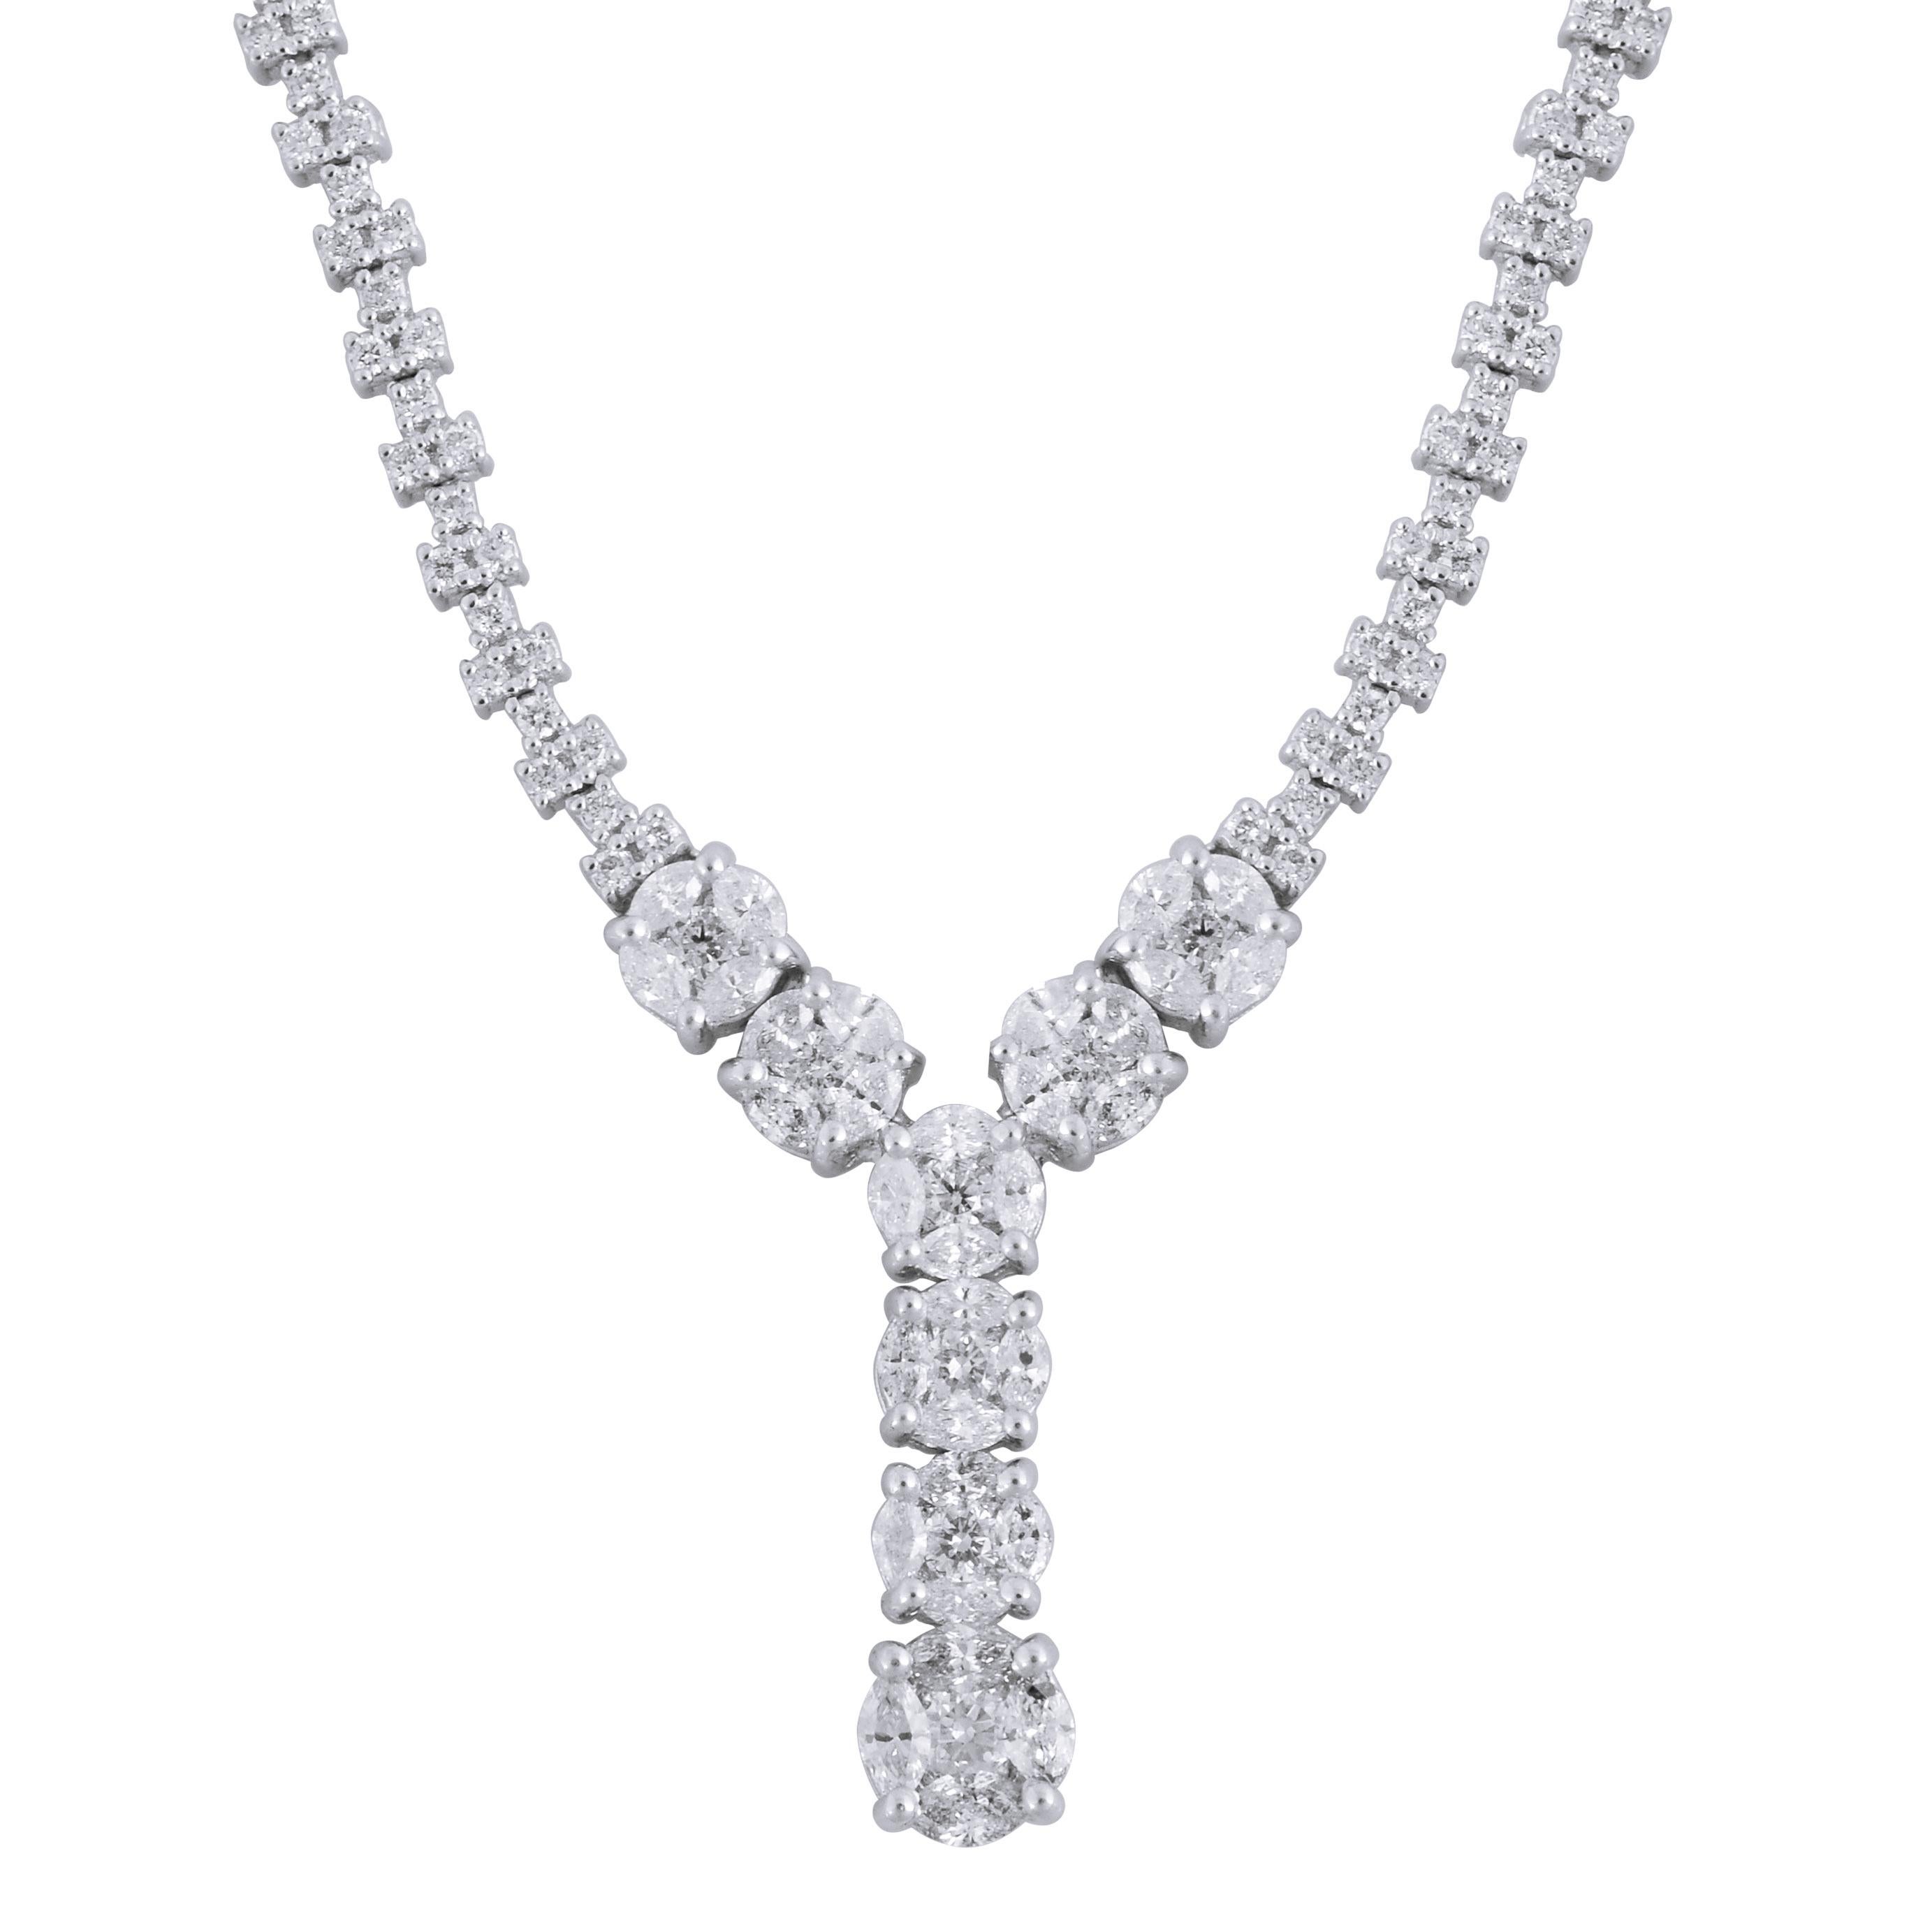 The necklace is designed to complement any wedding dress or formal attire, with its elegant and timeless style. The diamonds are carefully selected for their clarity and brilliance, ensuring that the necklace will shine brightly in any light.

This